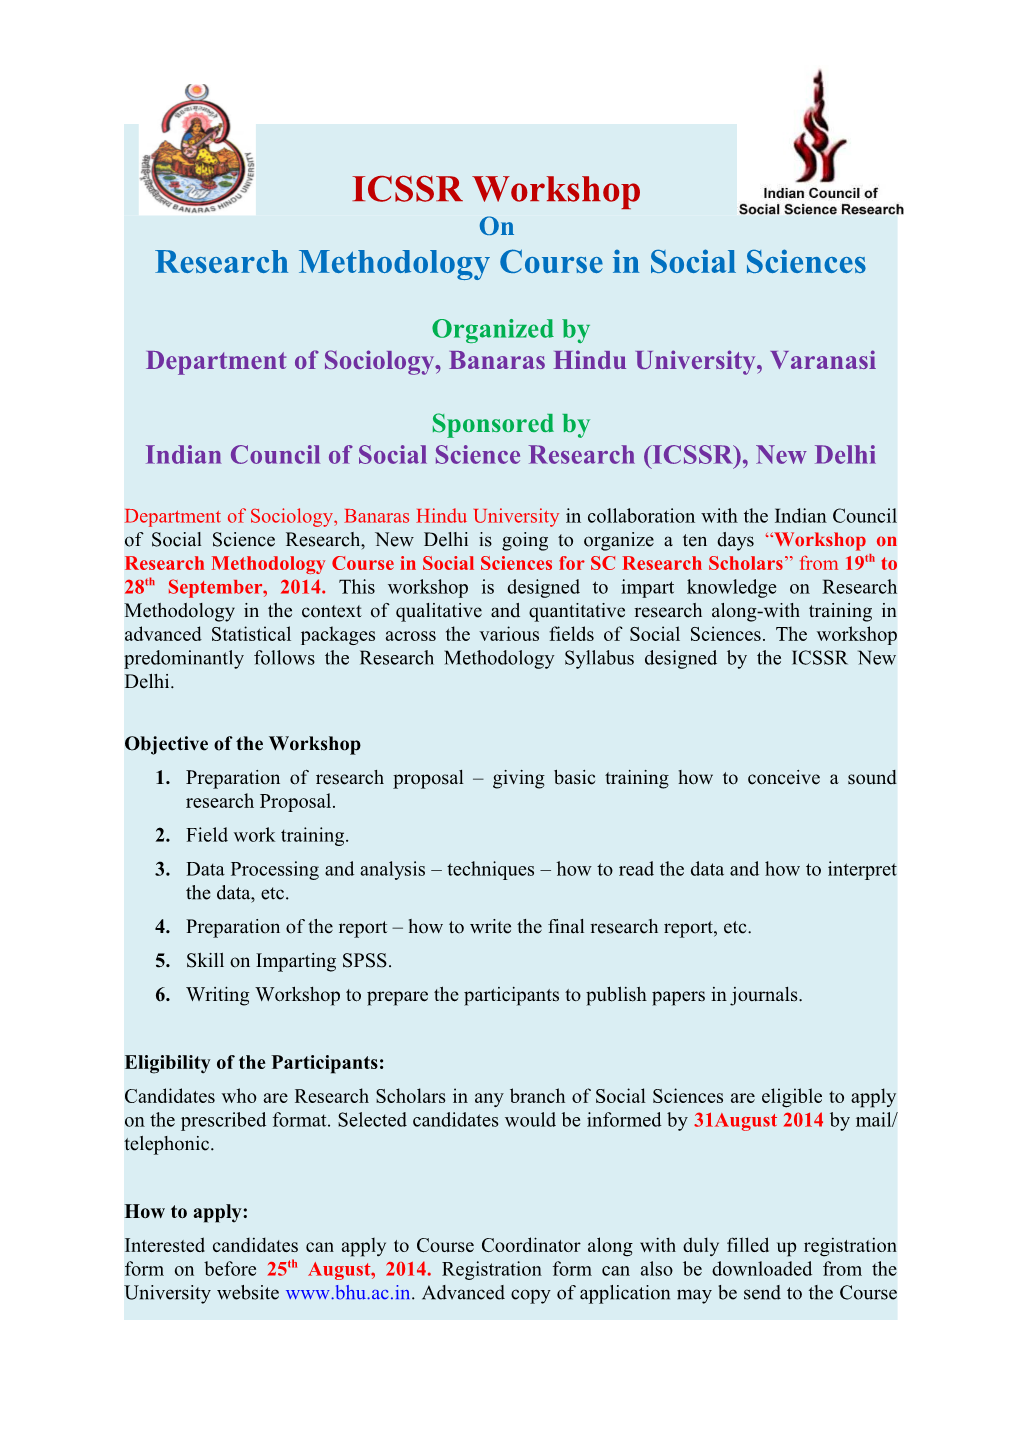 Research Methodology Course in Social Sciences